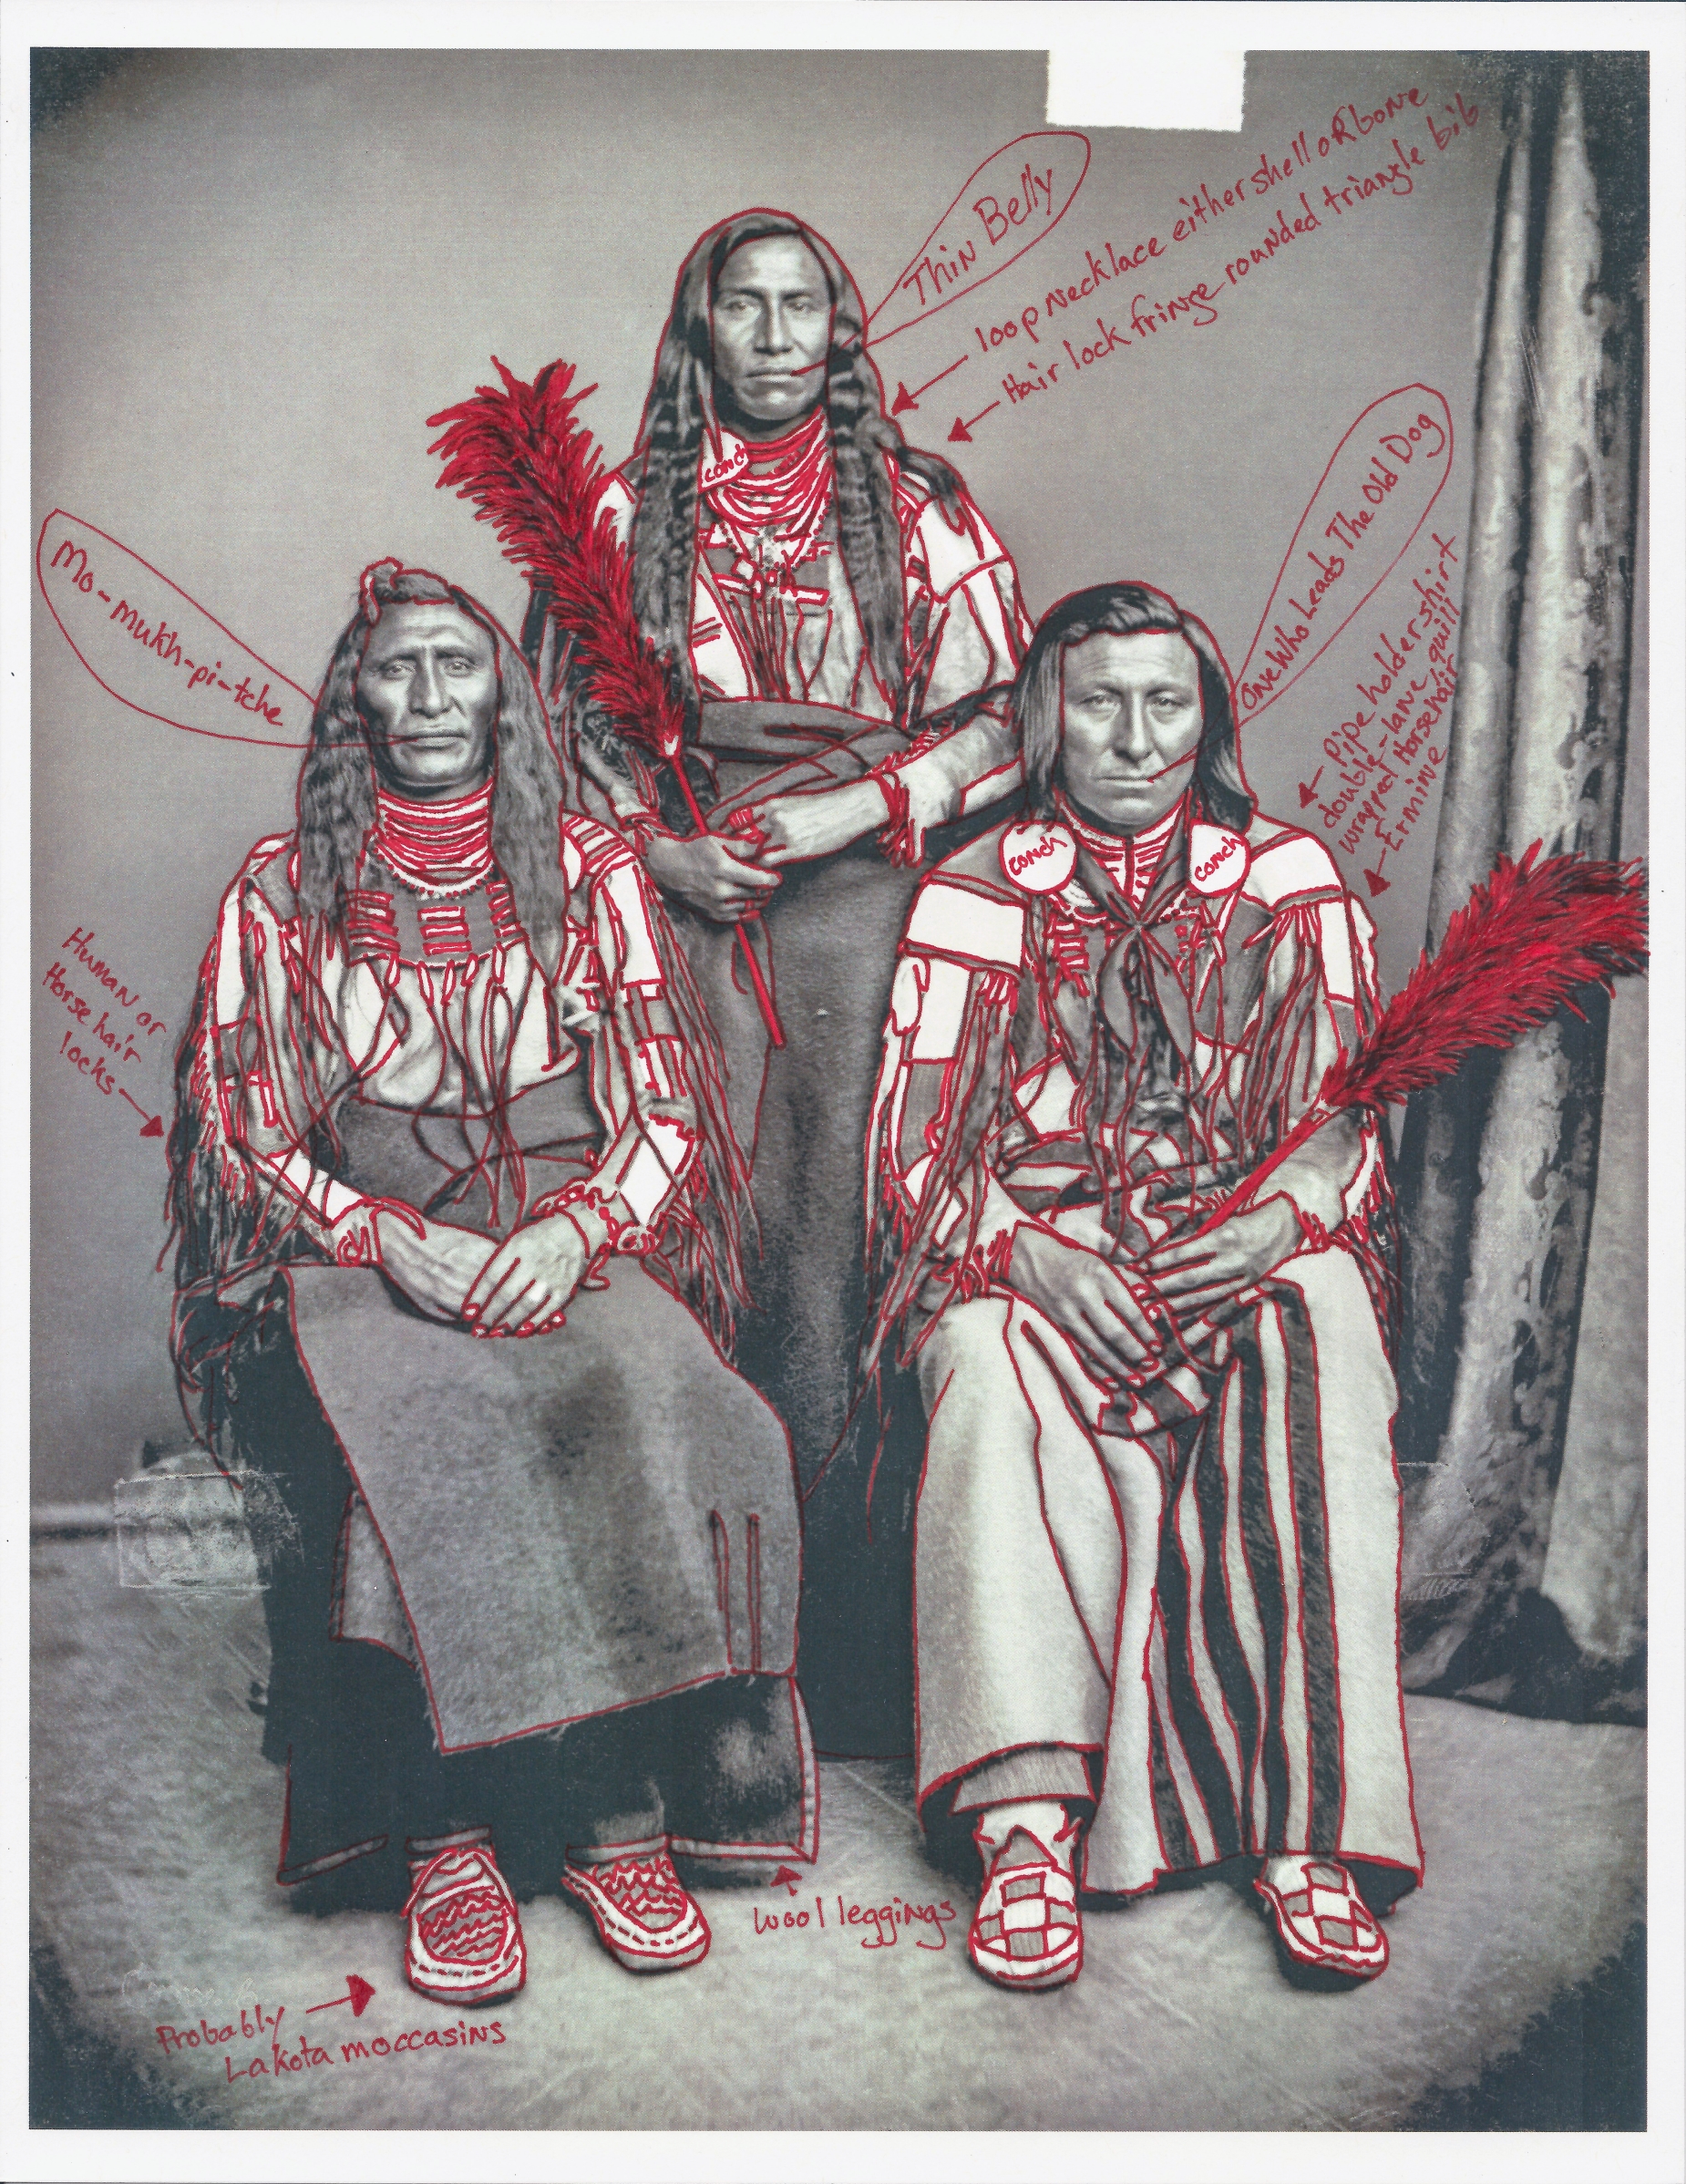 Wendy Red Star, Group Portrait of Three Men, Mo-Mukh-Pi-Tche, Ella-Causs-Se (Thin Belly), and Pish-Ki-Ha-DiRi-Ky-Ish (One Who Leads The Old Dog), from the series Diplomats of the Crow Nation, 1873 Crow Peace Delegation, 2017. Pigment print on archival photo-paper, 17 x 25 in. (43.2 x 63.5 cm) Collection of the artist © Wendy Red Star